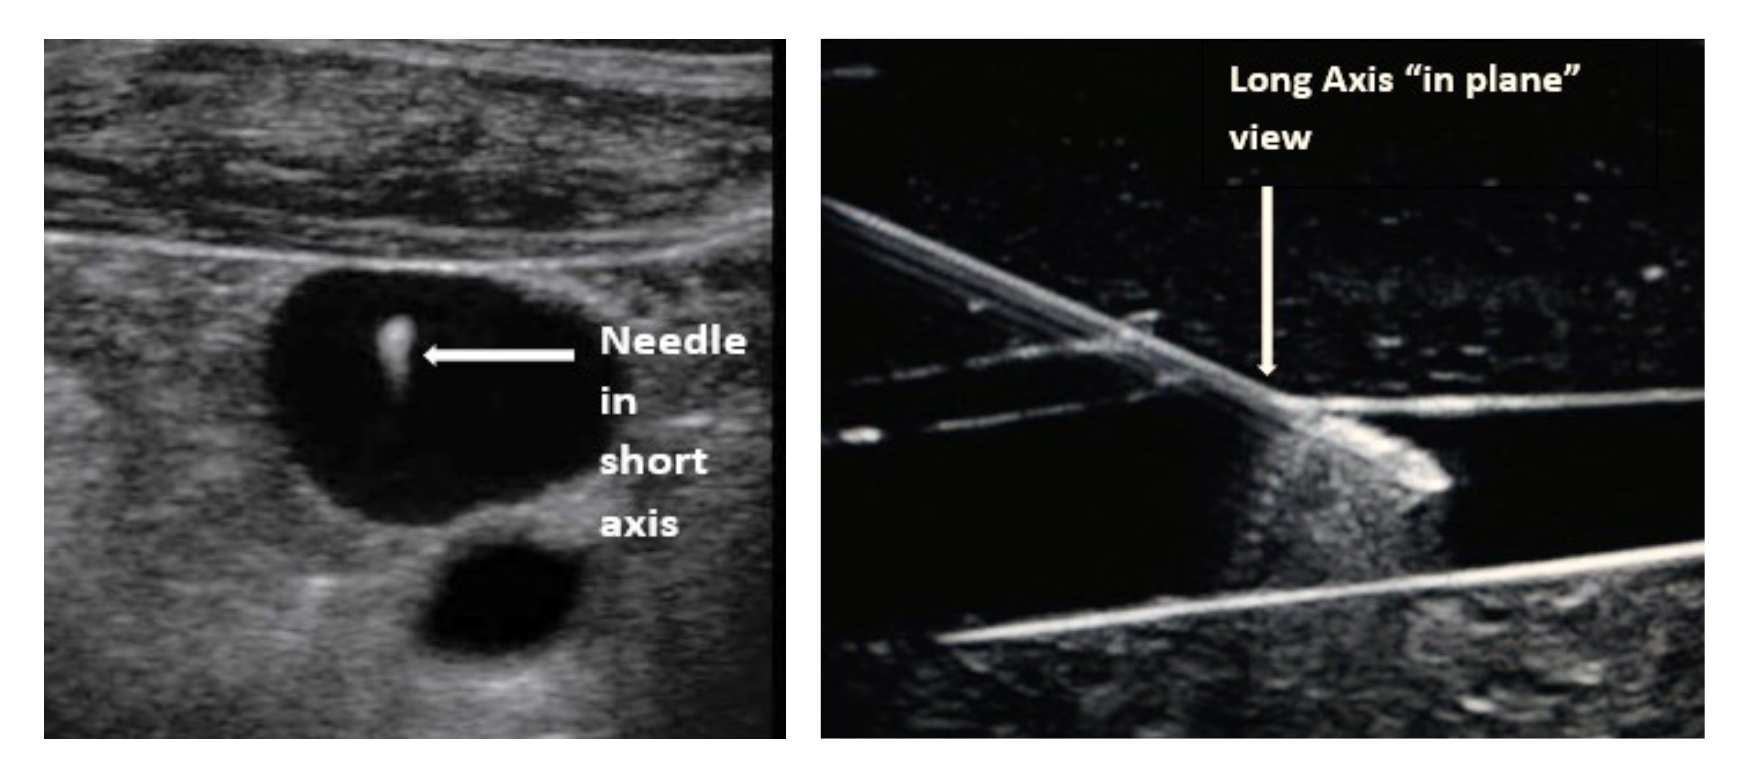 Benefits of Ultrasound Guidance when used to aid in central venous, peripheral venous, or arterial access. 